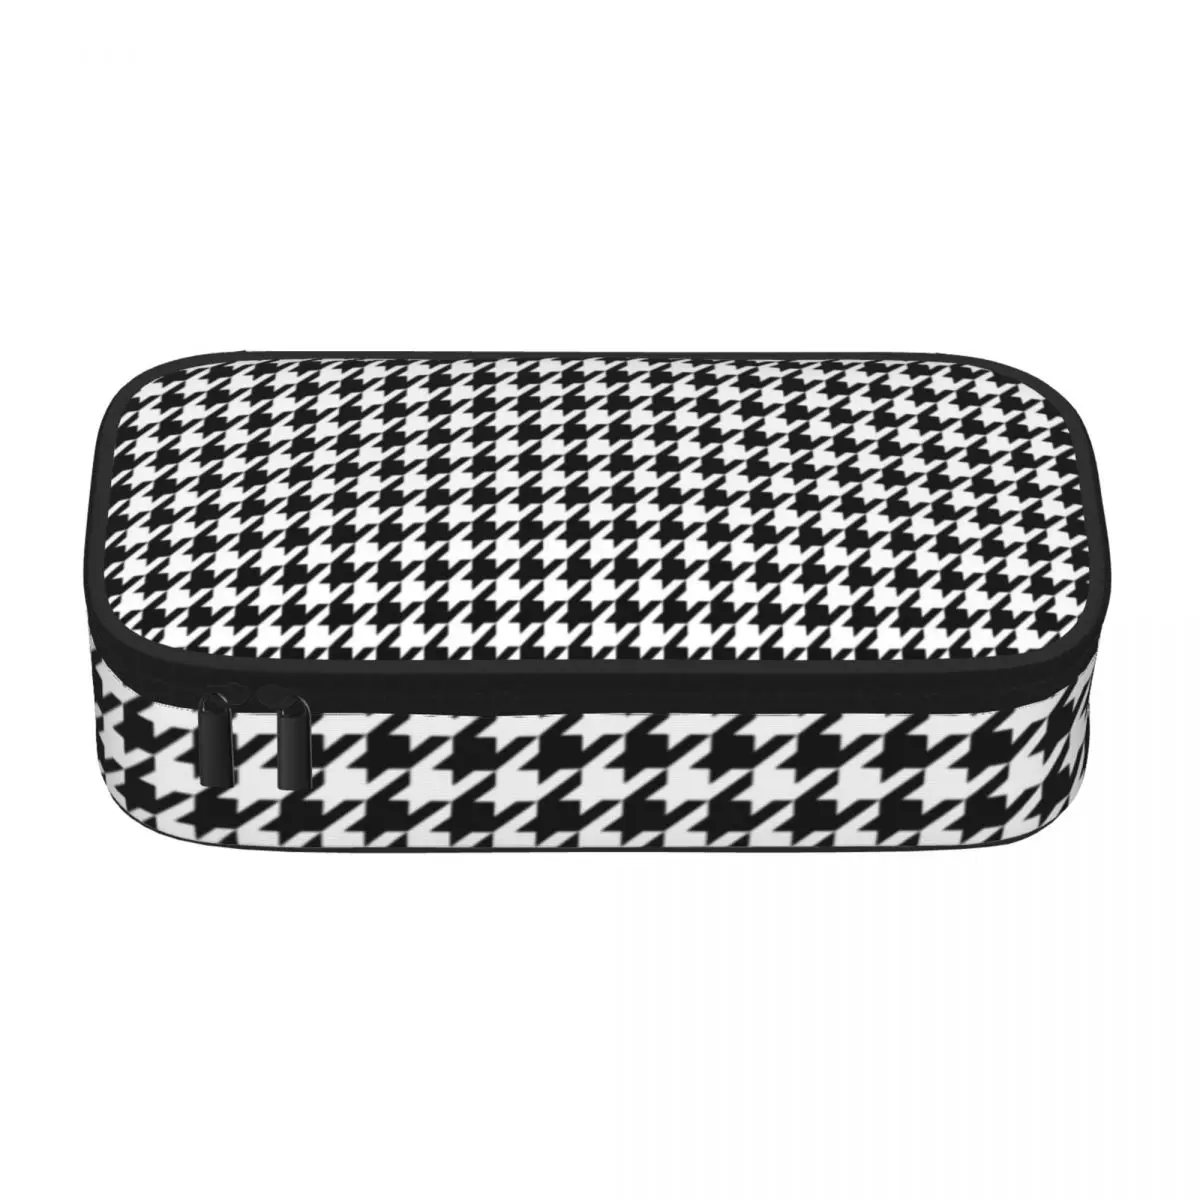 Black And White Houndstooth Pencil Case Classic Pattern Large Capacity Kawaii Pencil Box For Teens Elementary School Pen Bags